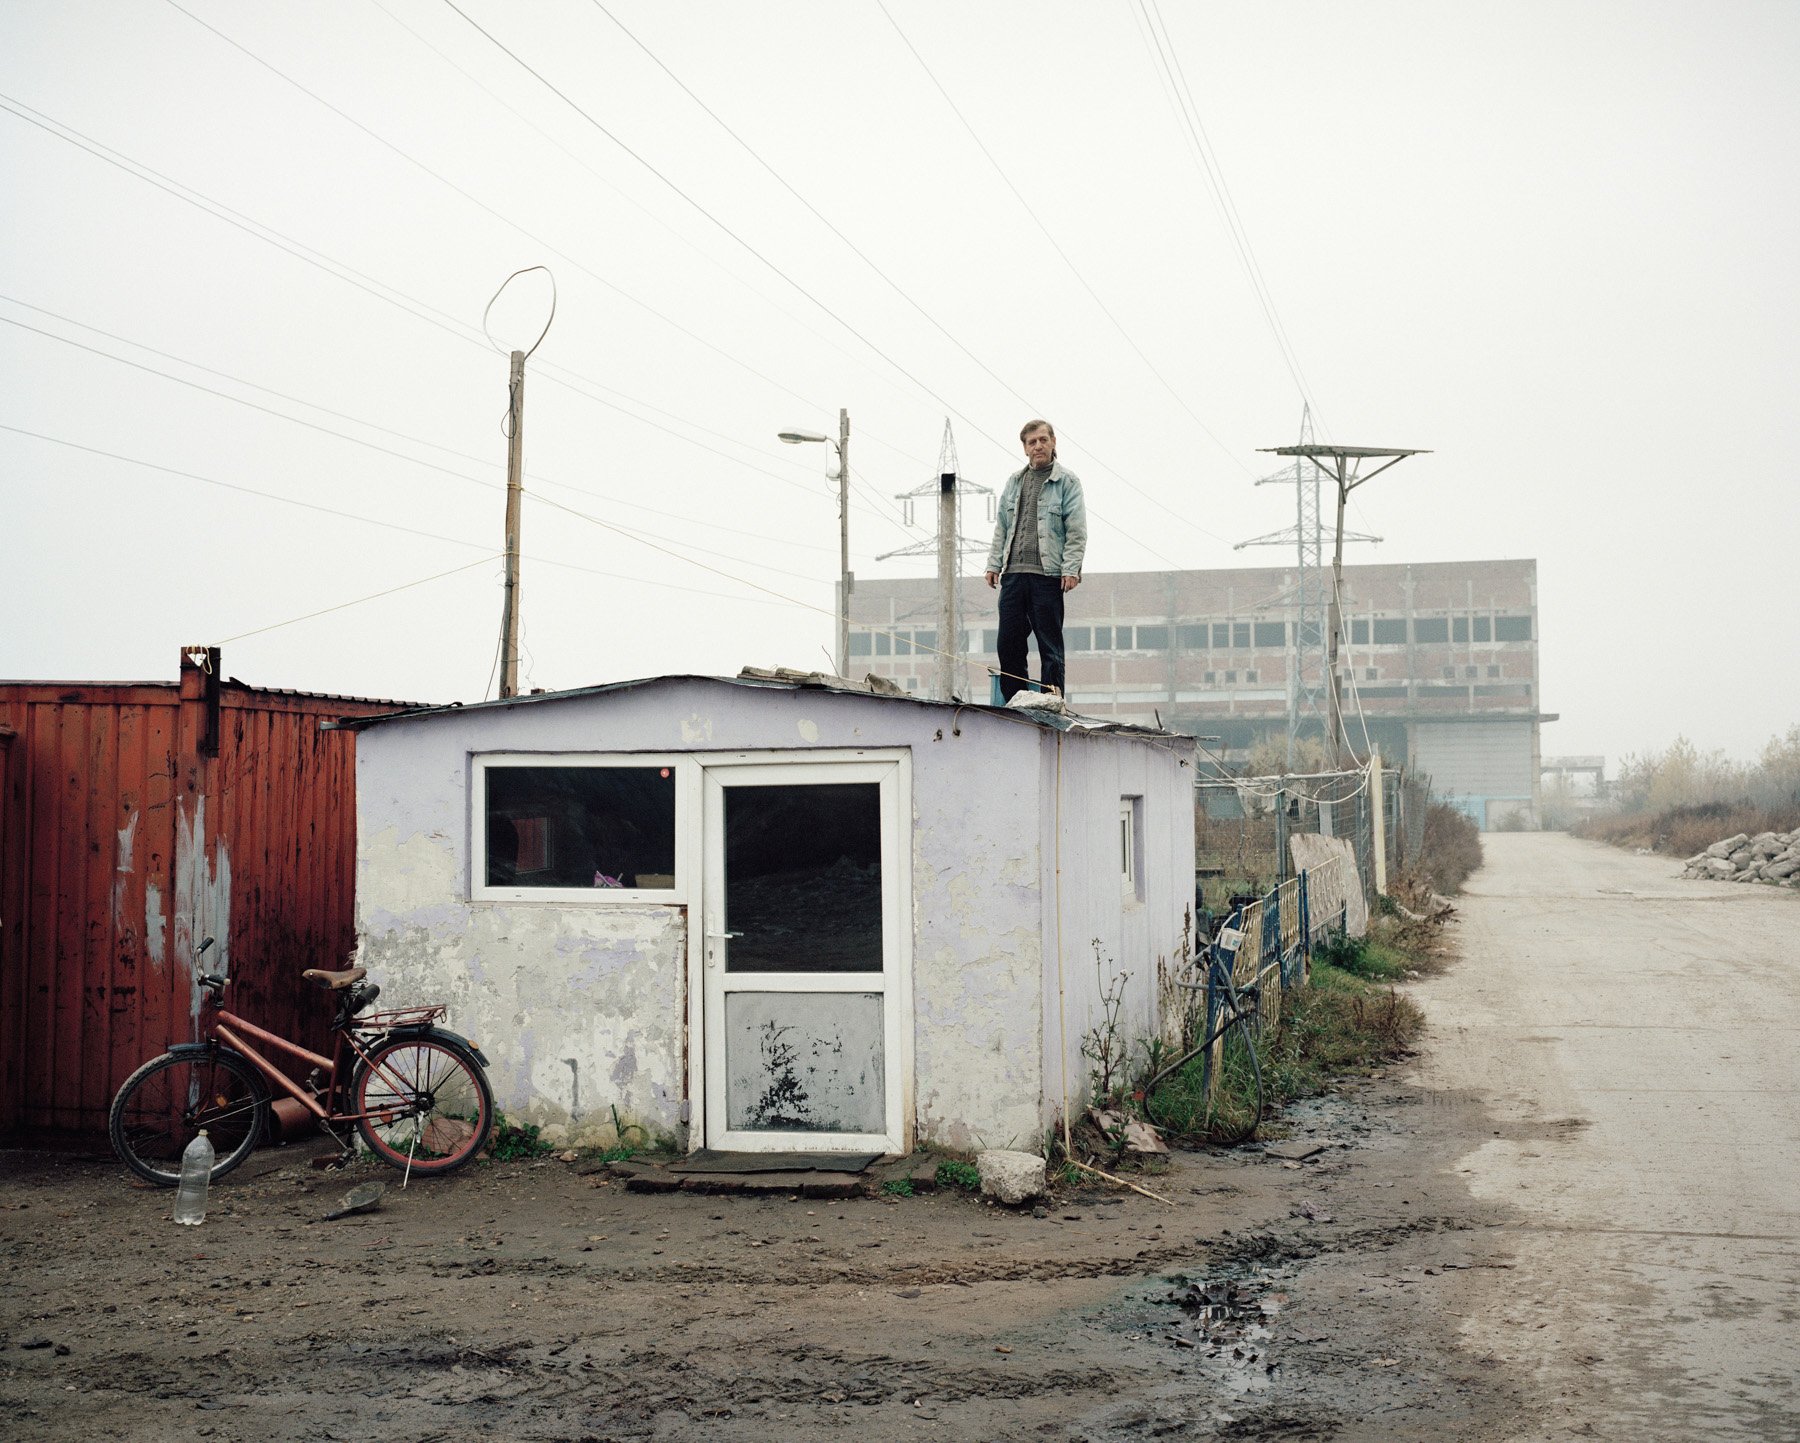  Romania, Giurgiu. 2016. A man working as security guard stand on a barrack in front of an abandoned factory that he watch. 